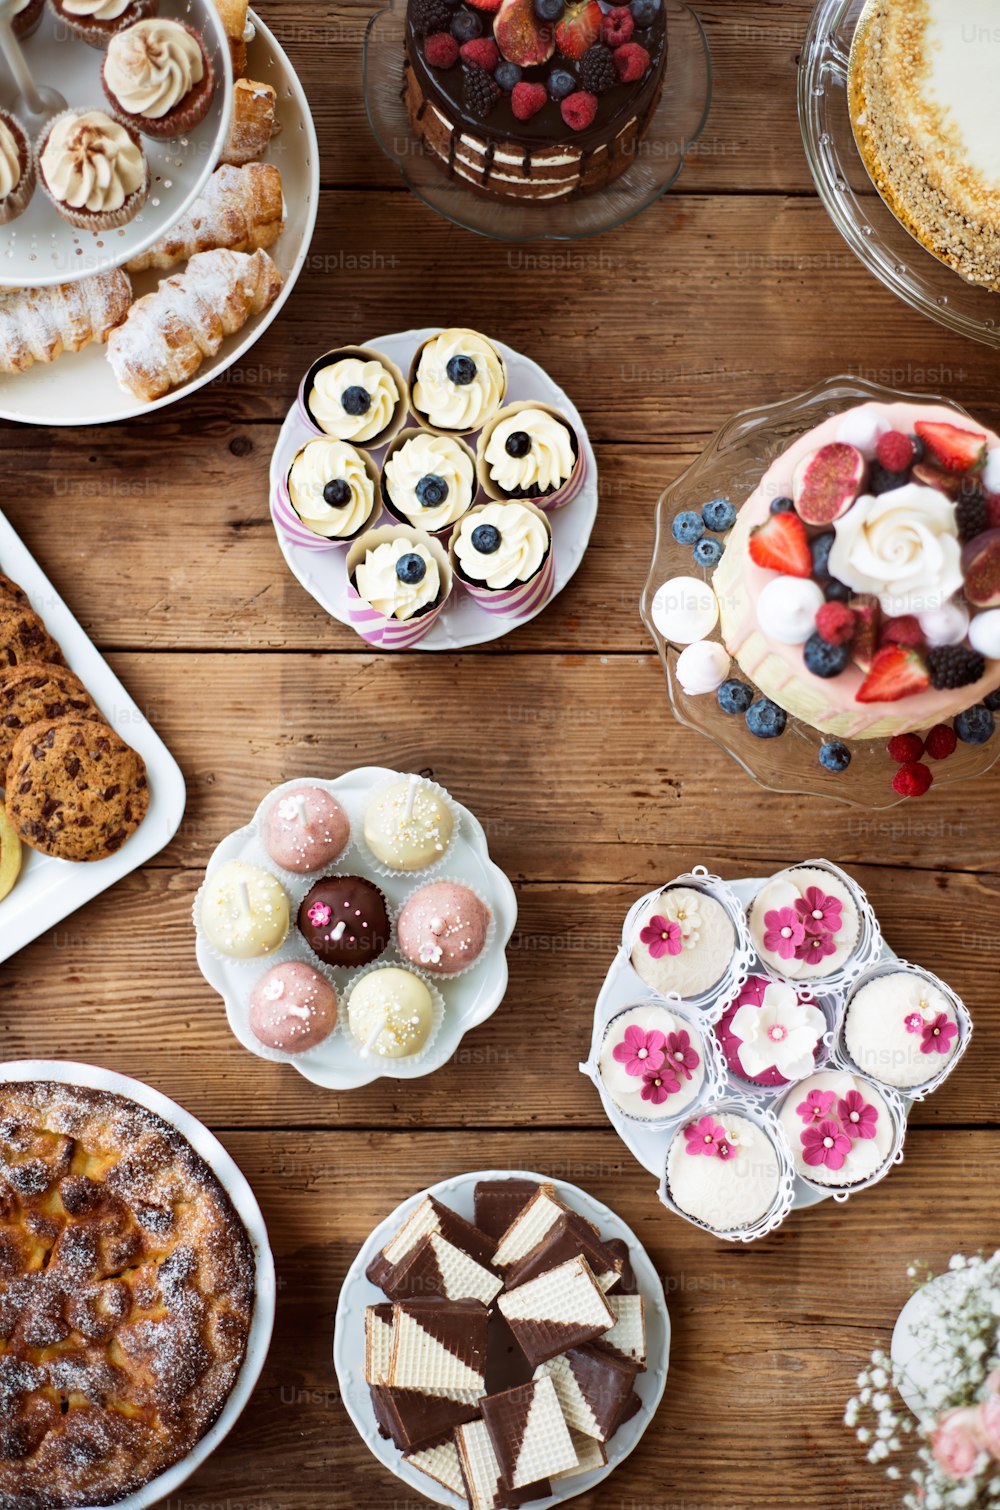 Table with loads of cakes, cupcakes, cookies, pie and cakepops. Studio shot on brown wooden background. Flat lay.